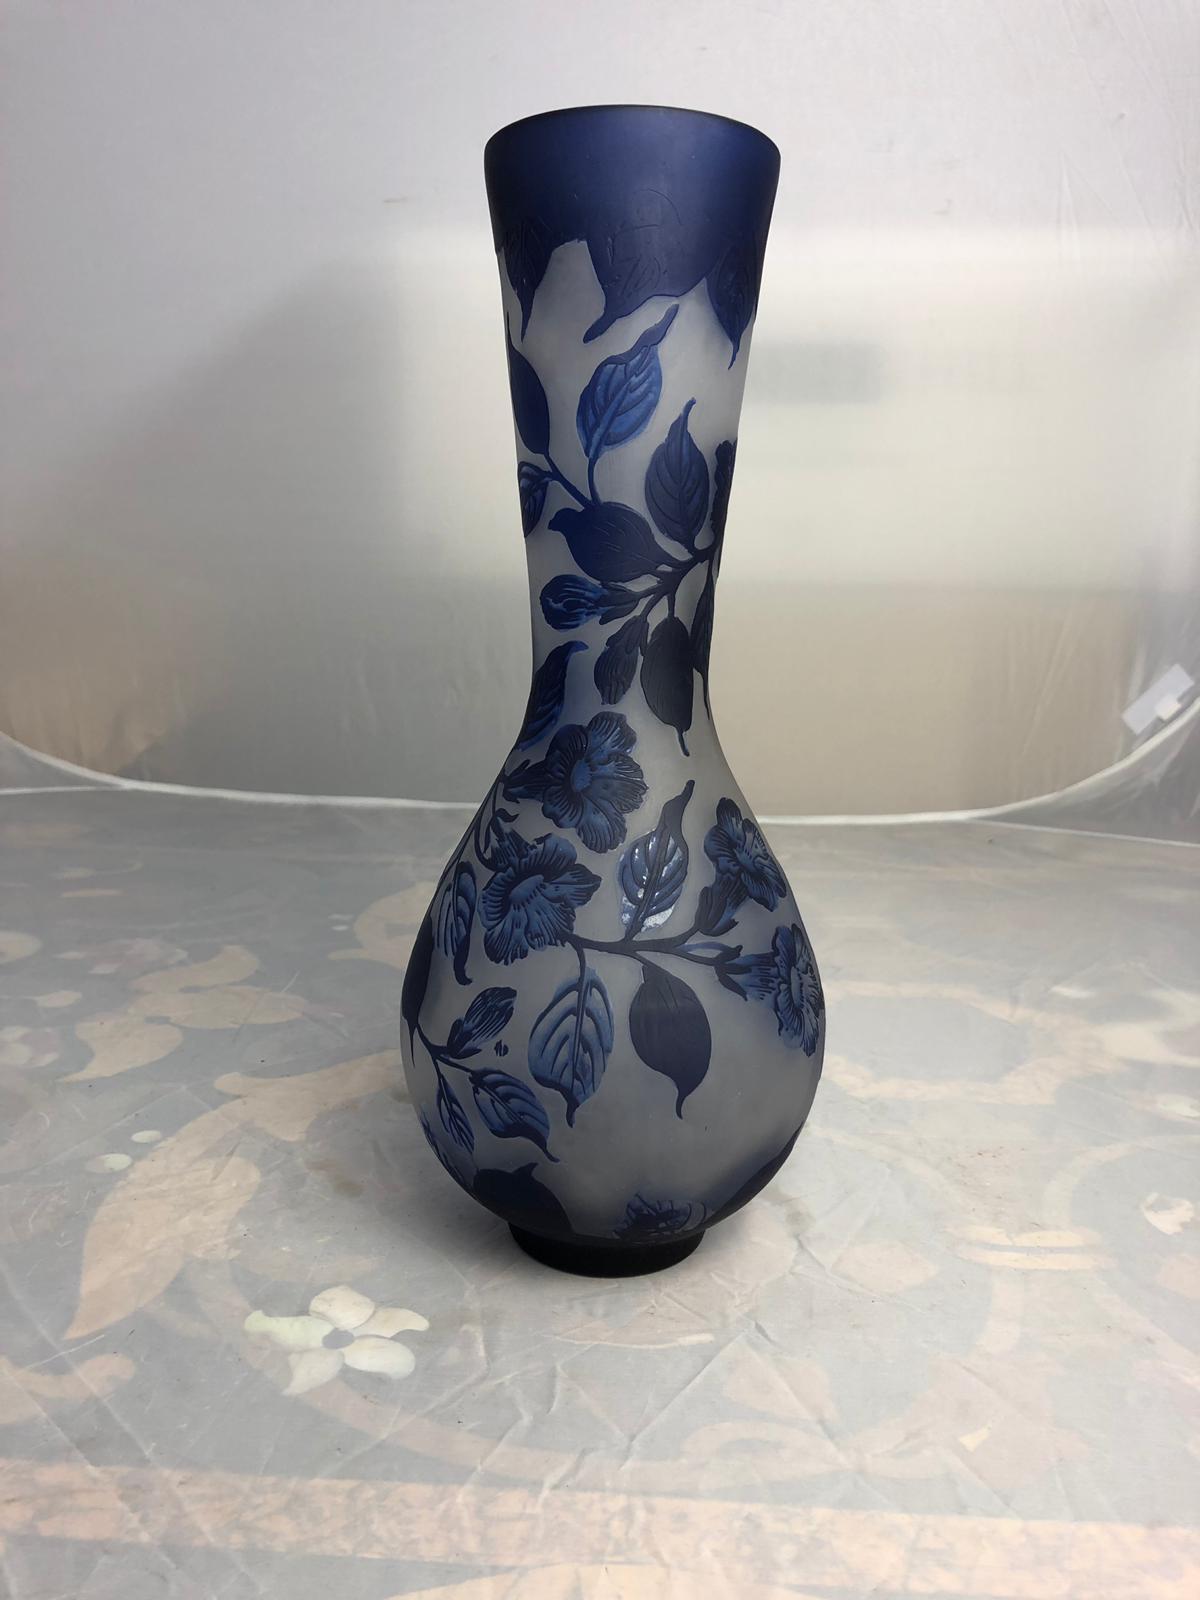 A French Gallé vase, Art Deco Nouveau Cameo style, 20th century. A stunning enabled vase with floral pattern in a Royal, Yale and sapphire blue.